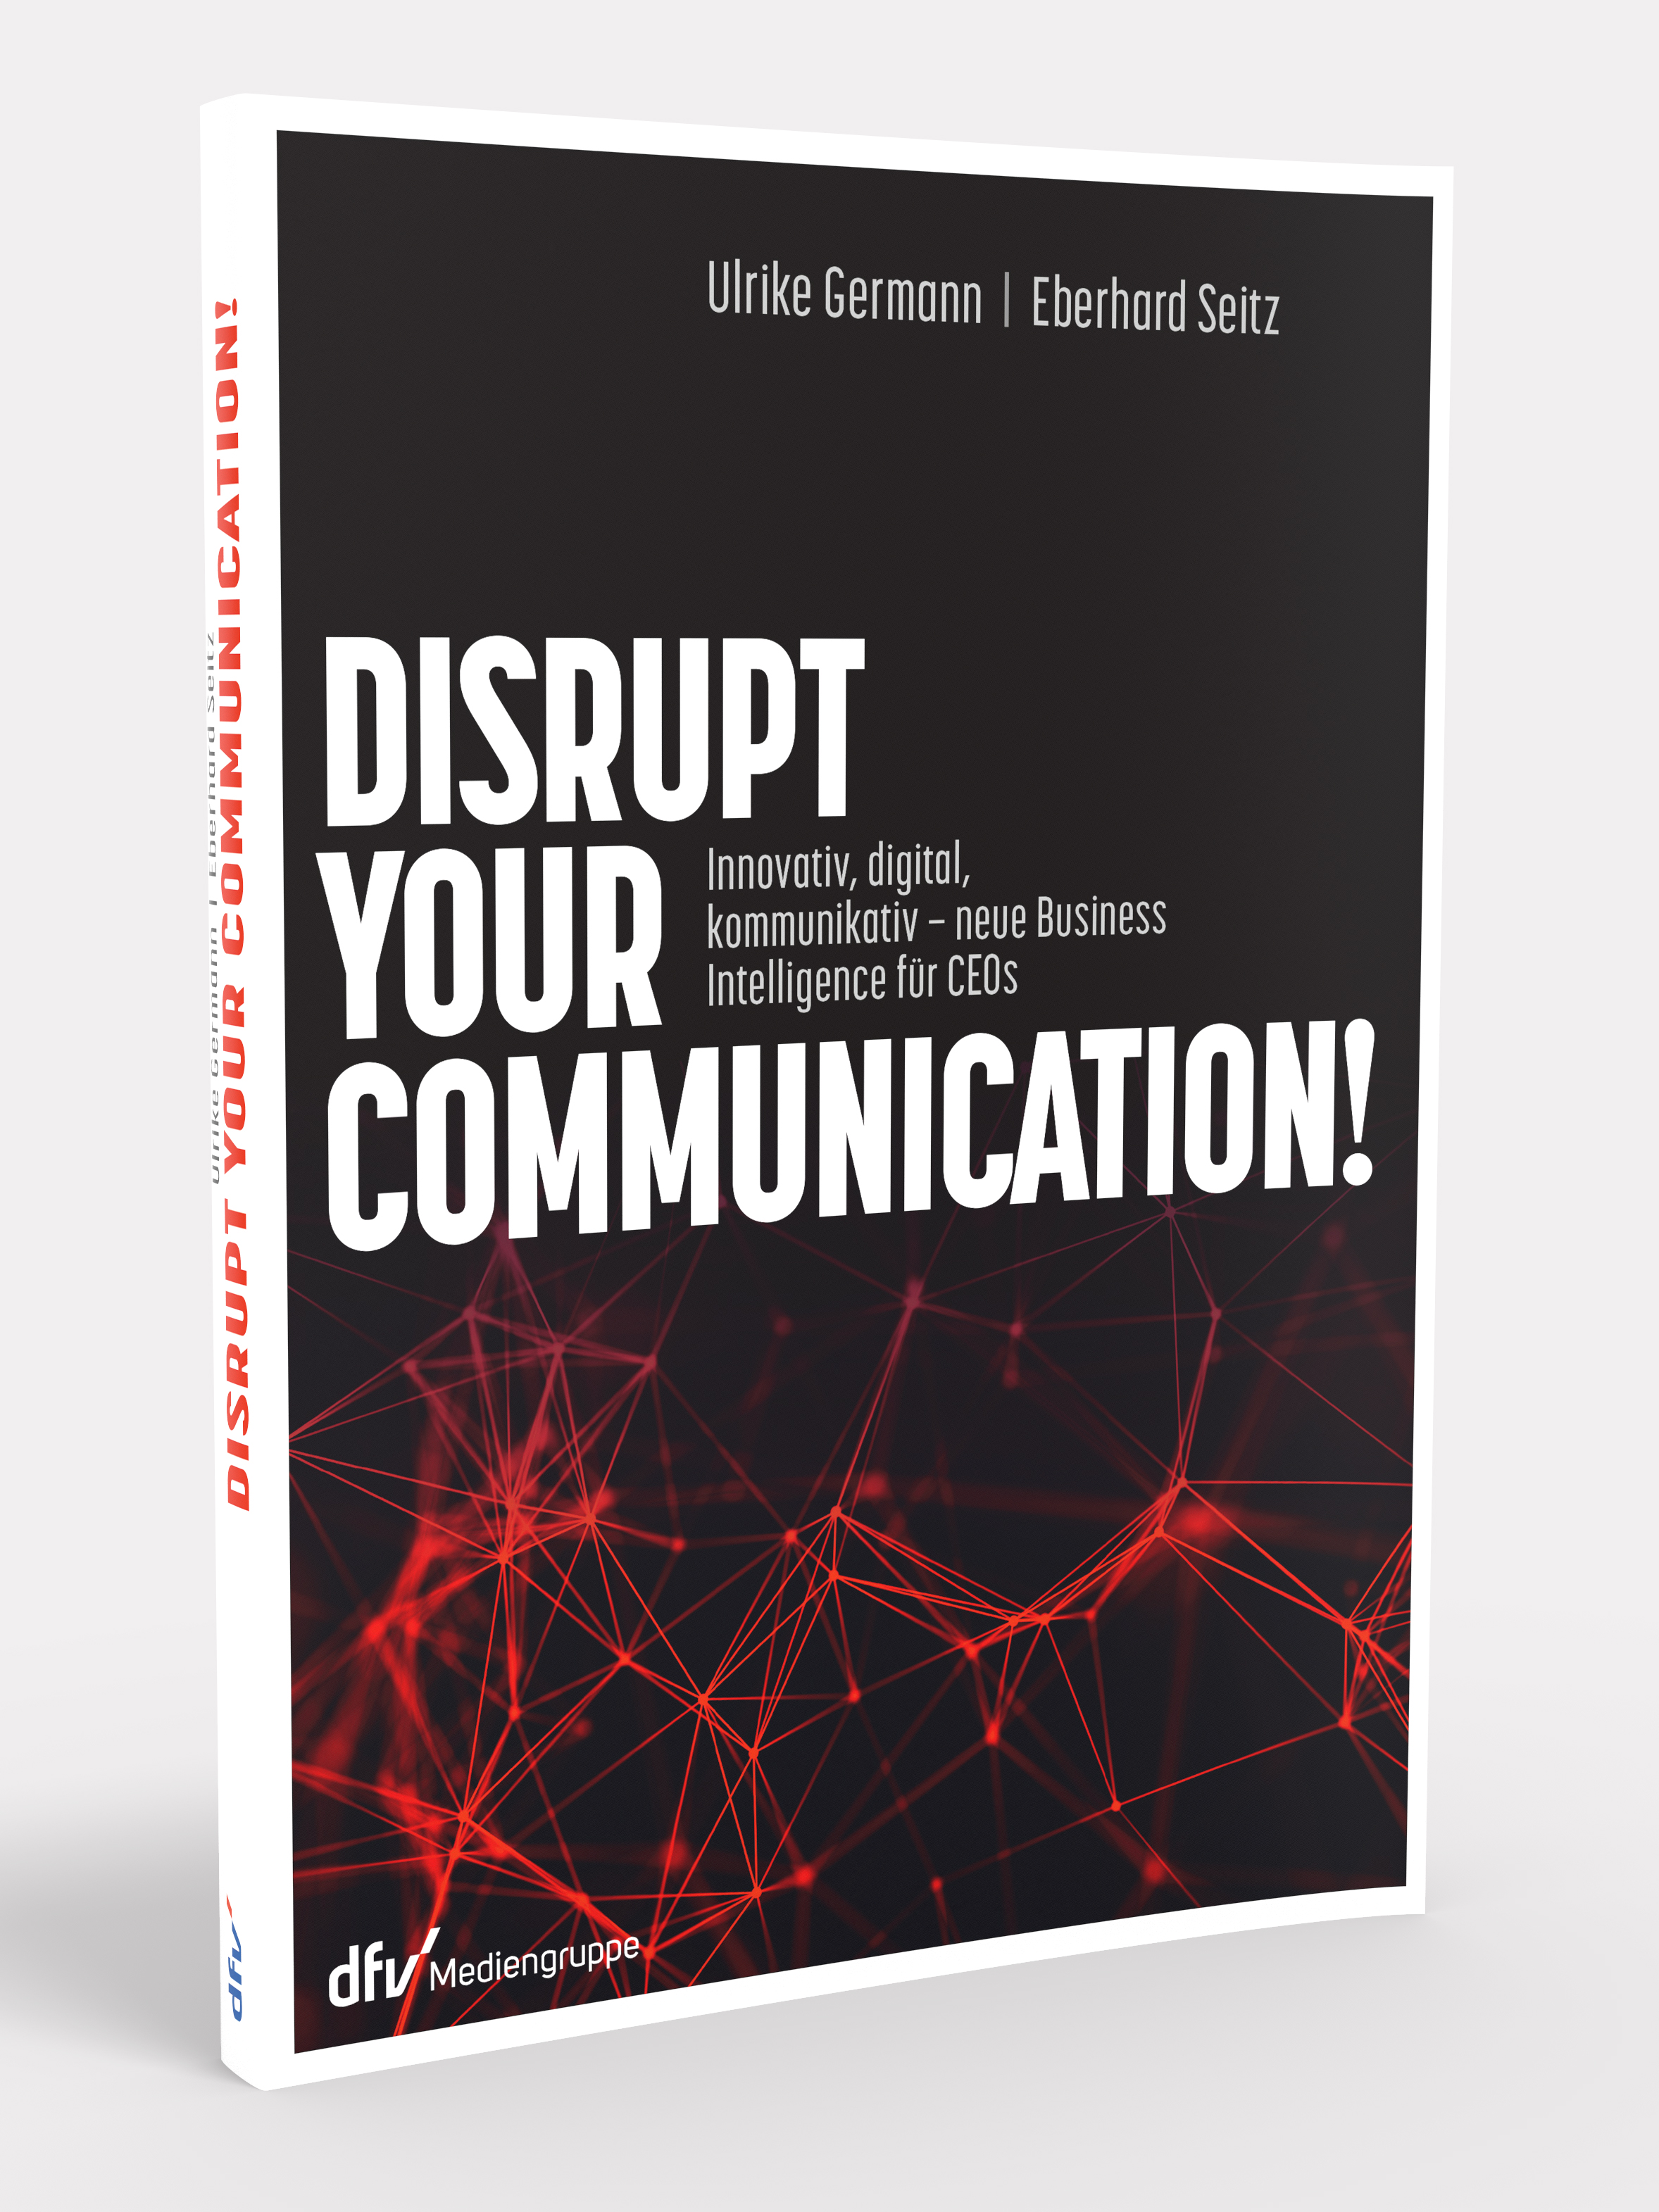 Disrupt Your Communication!